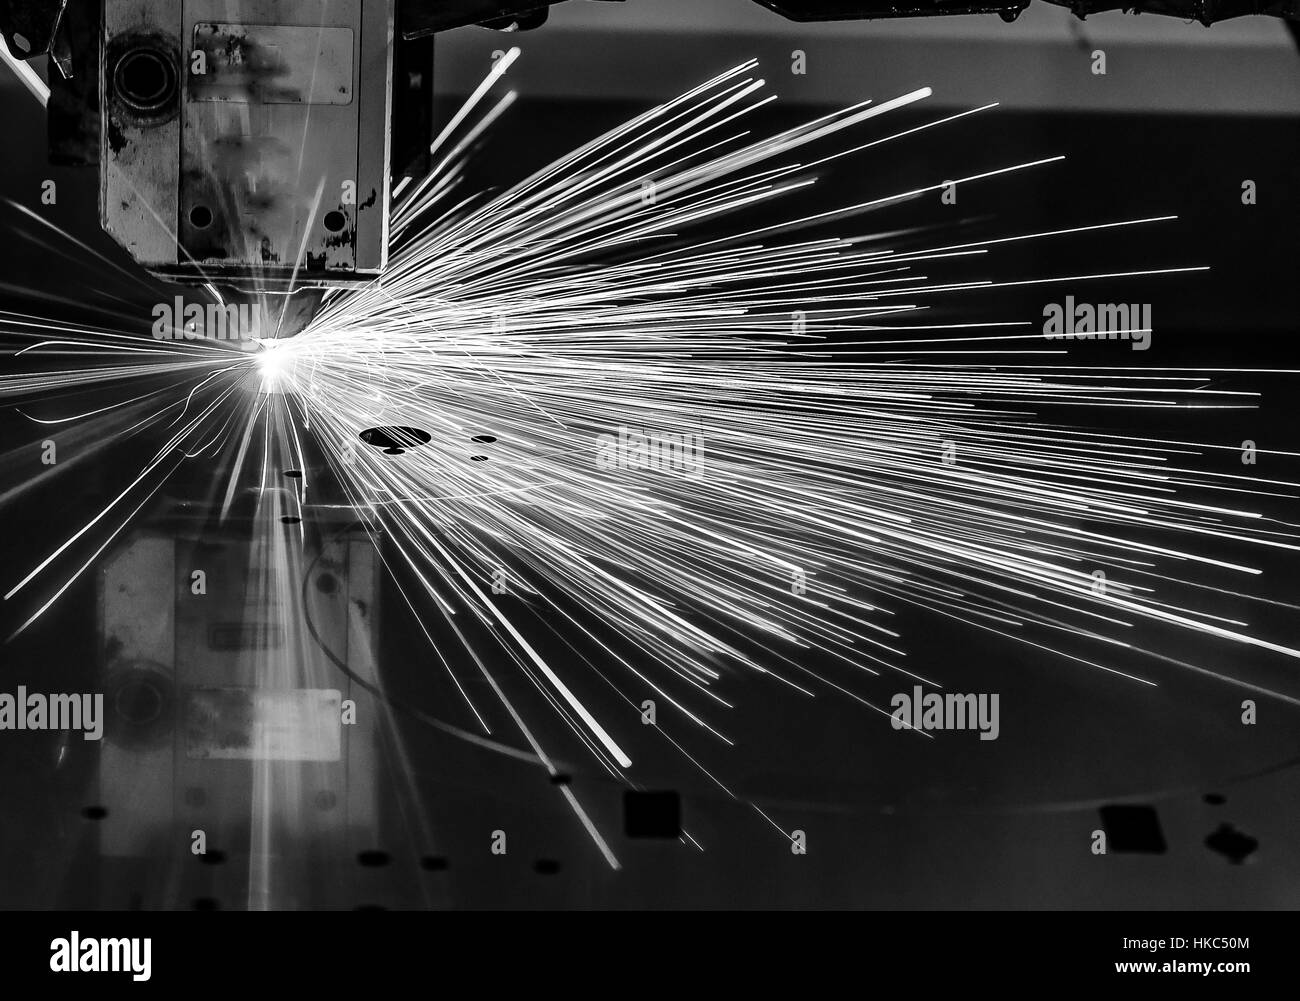 Industrial Laser cutting processing manufacture technology of flat sheet metal steel material with sparks laser cut metal splashes Stock Photo